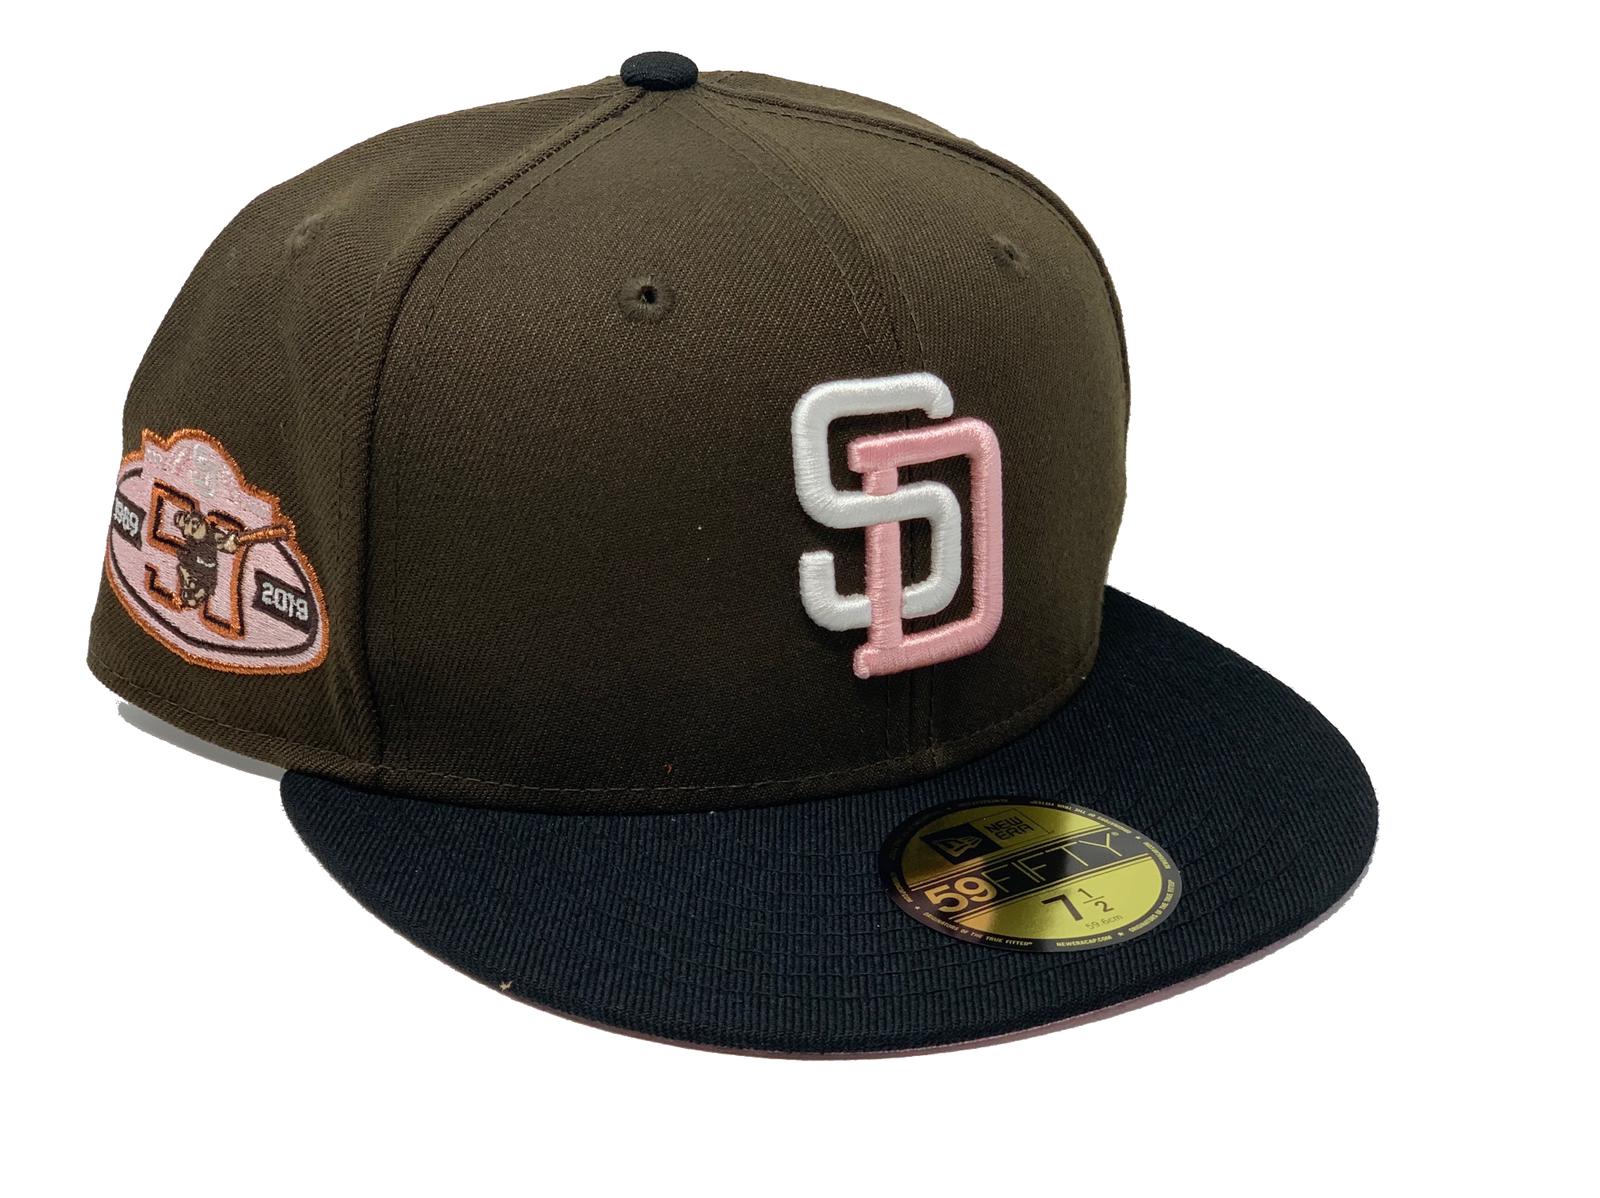 padres 50th anniversary jersey